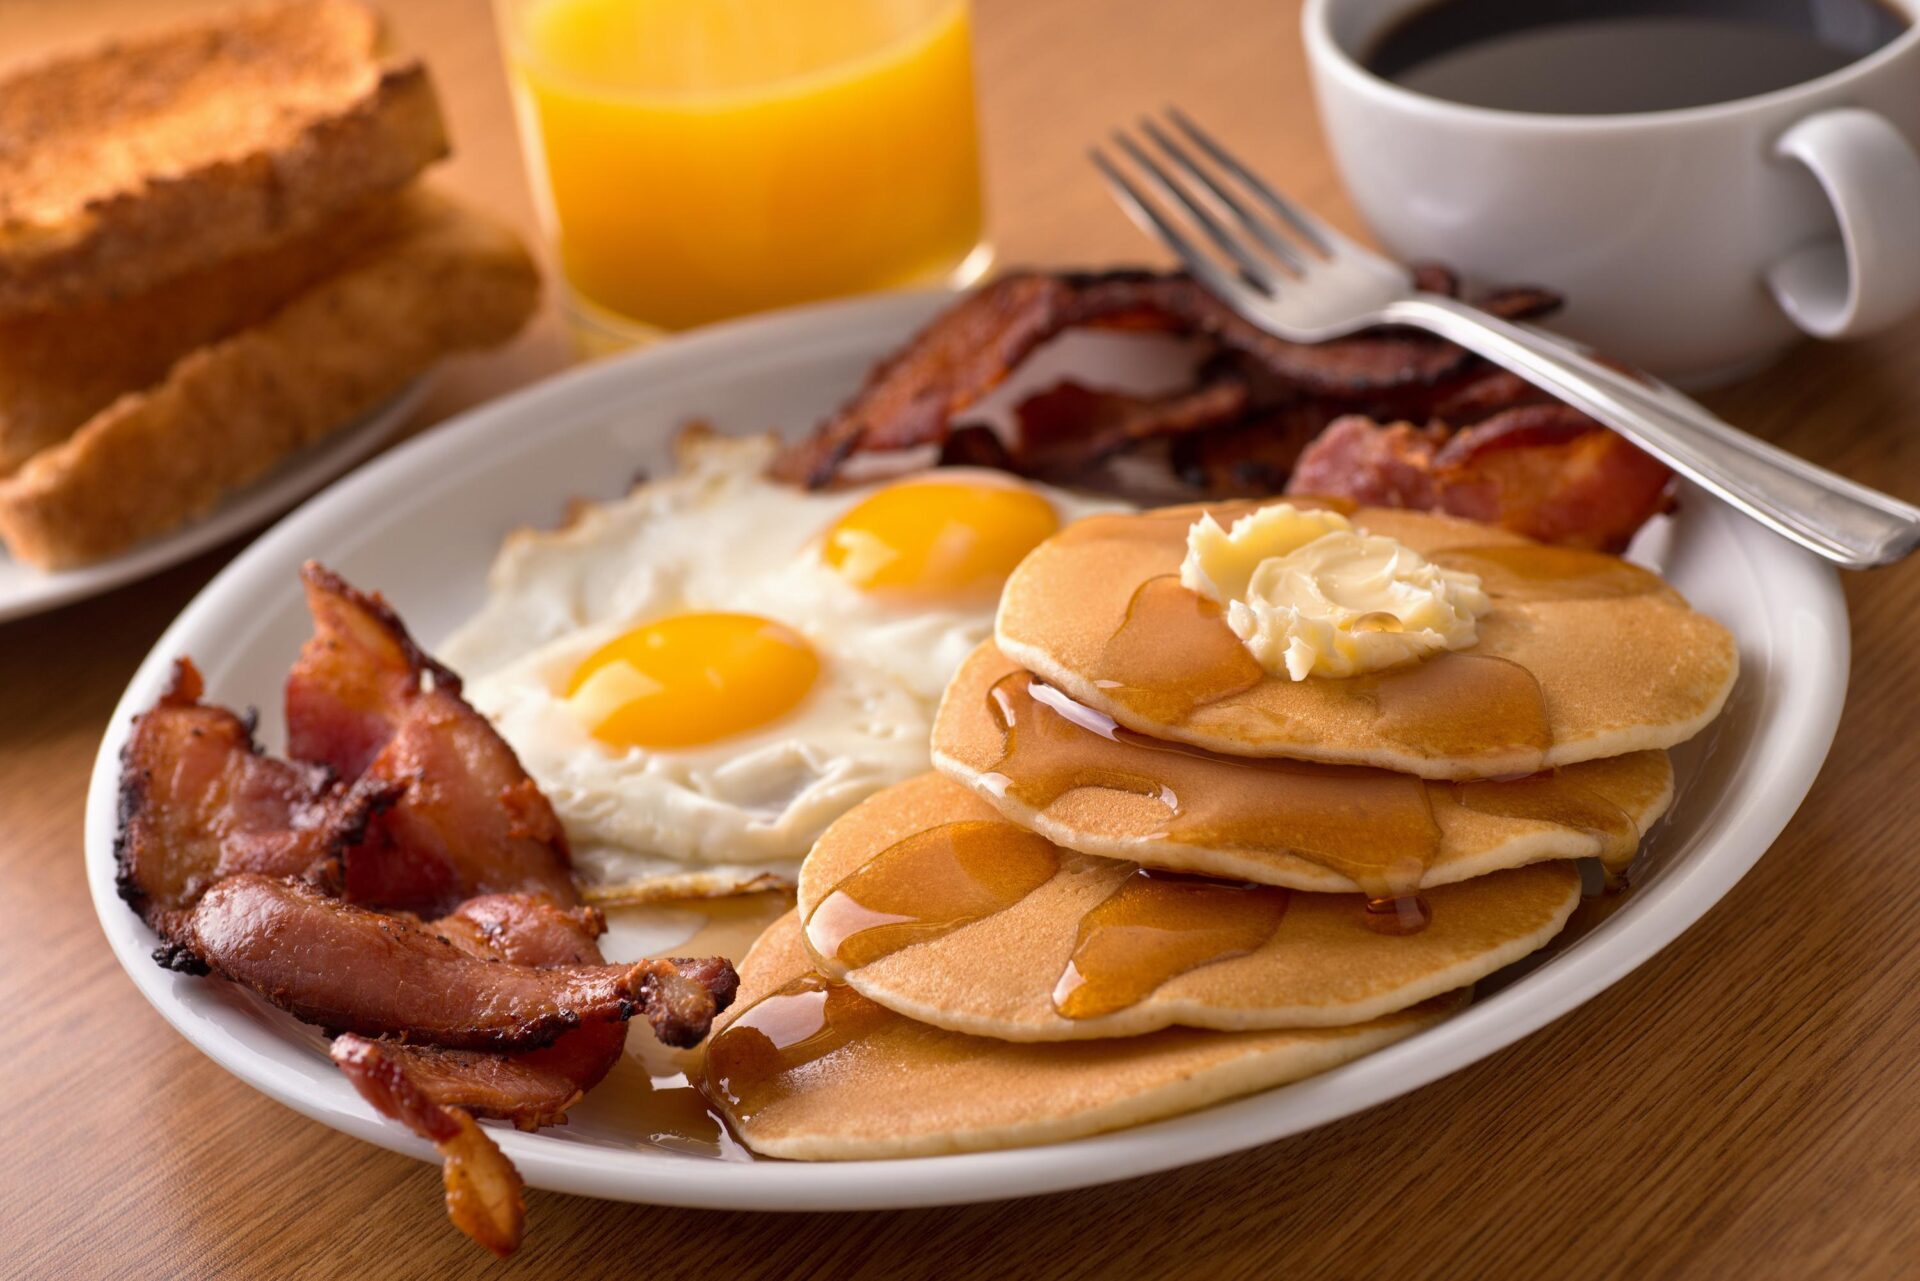 A plate of pancakes, eggs, and bacon.